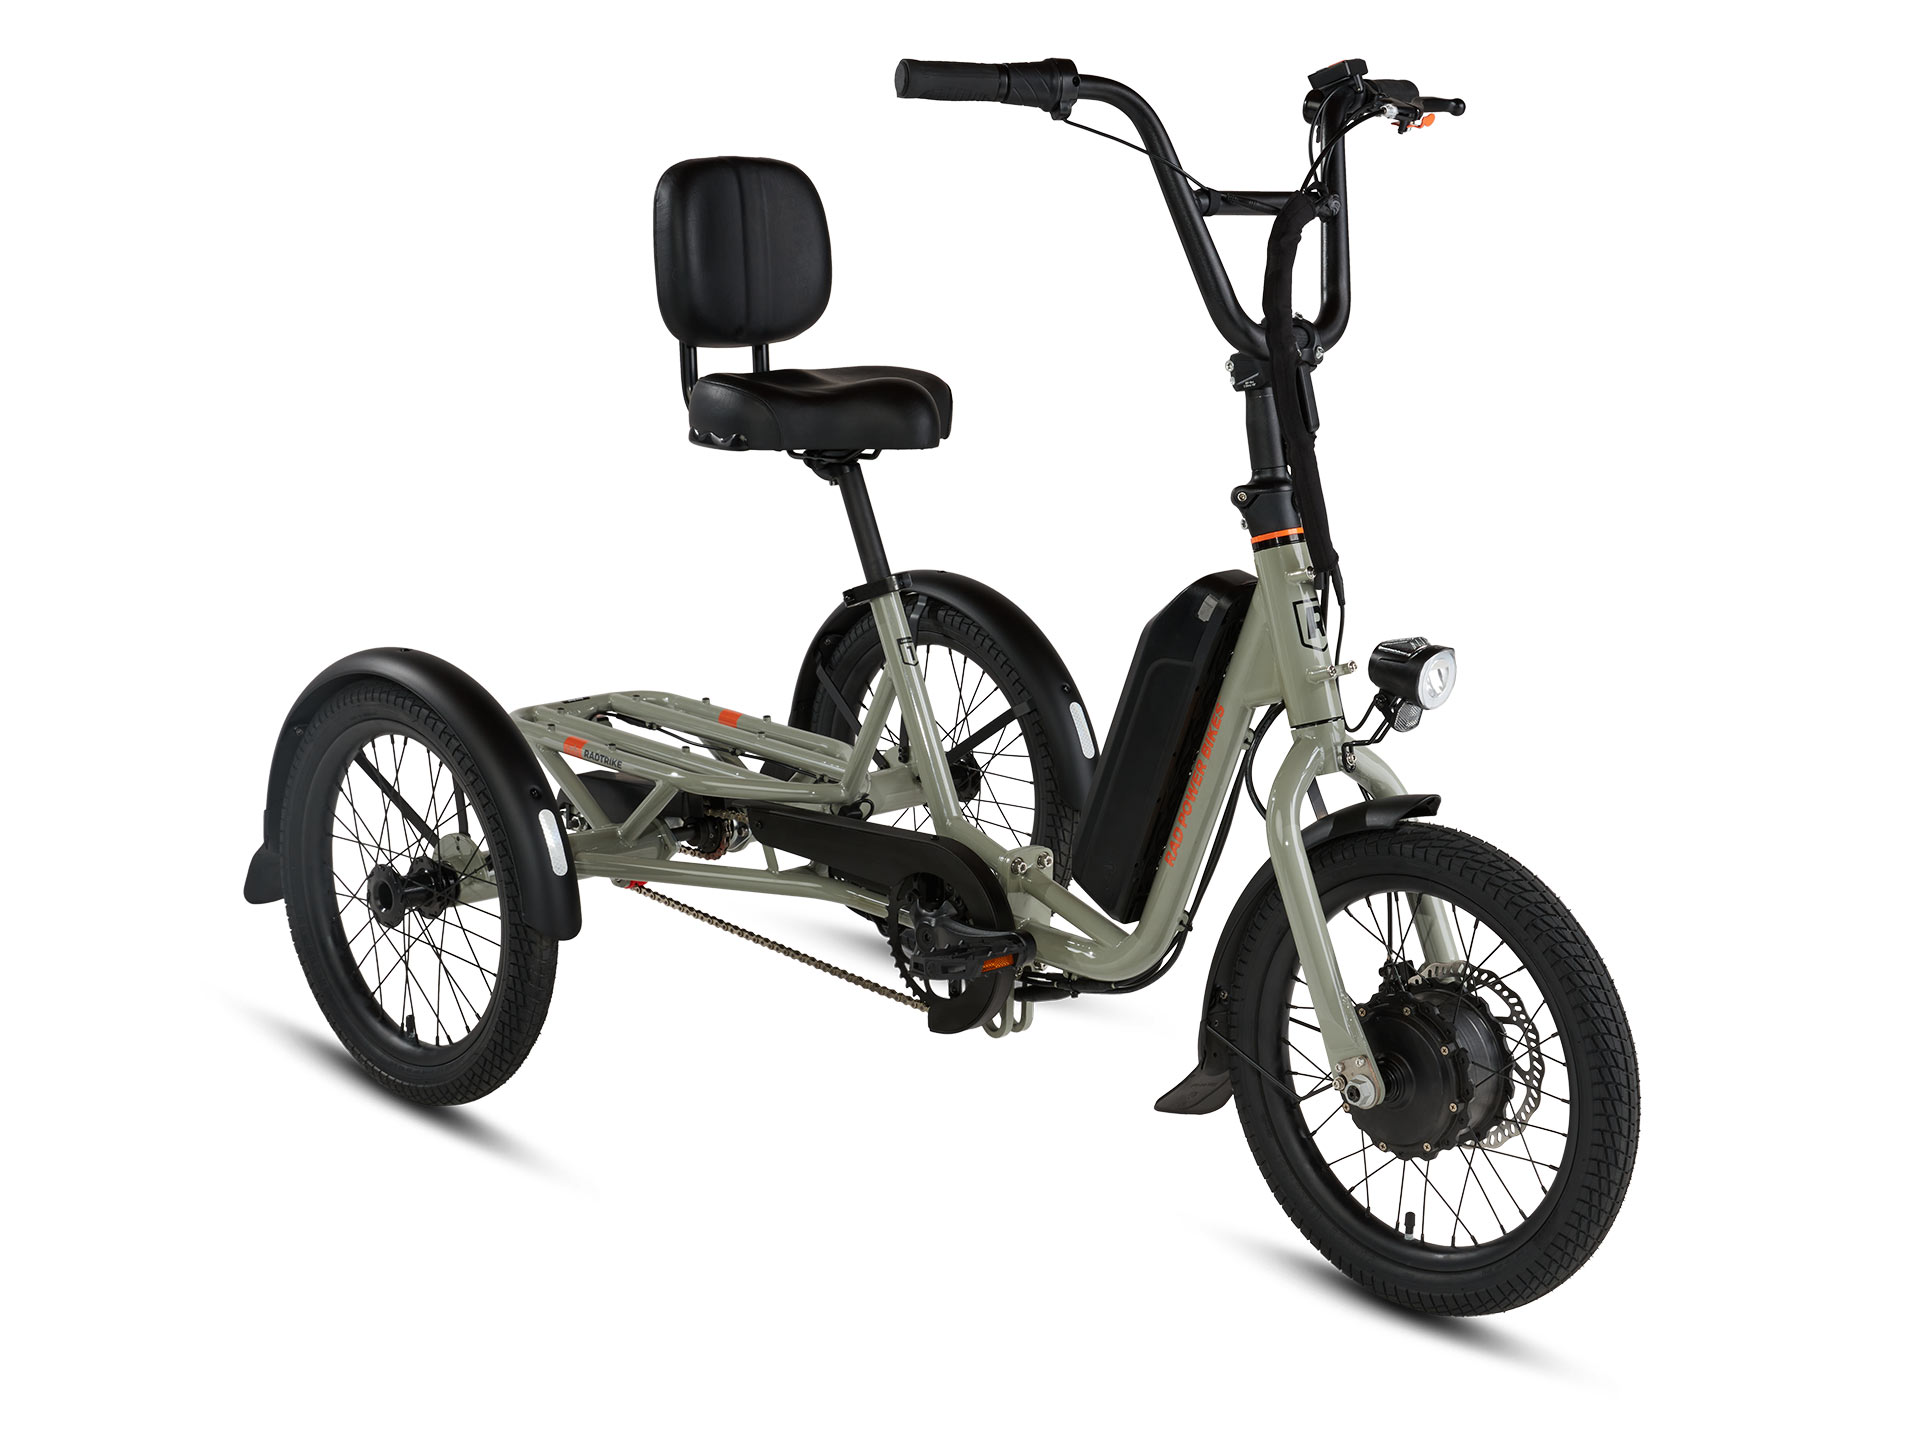 The RadTrike is available for preorder now at $2,499.